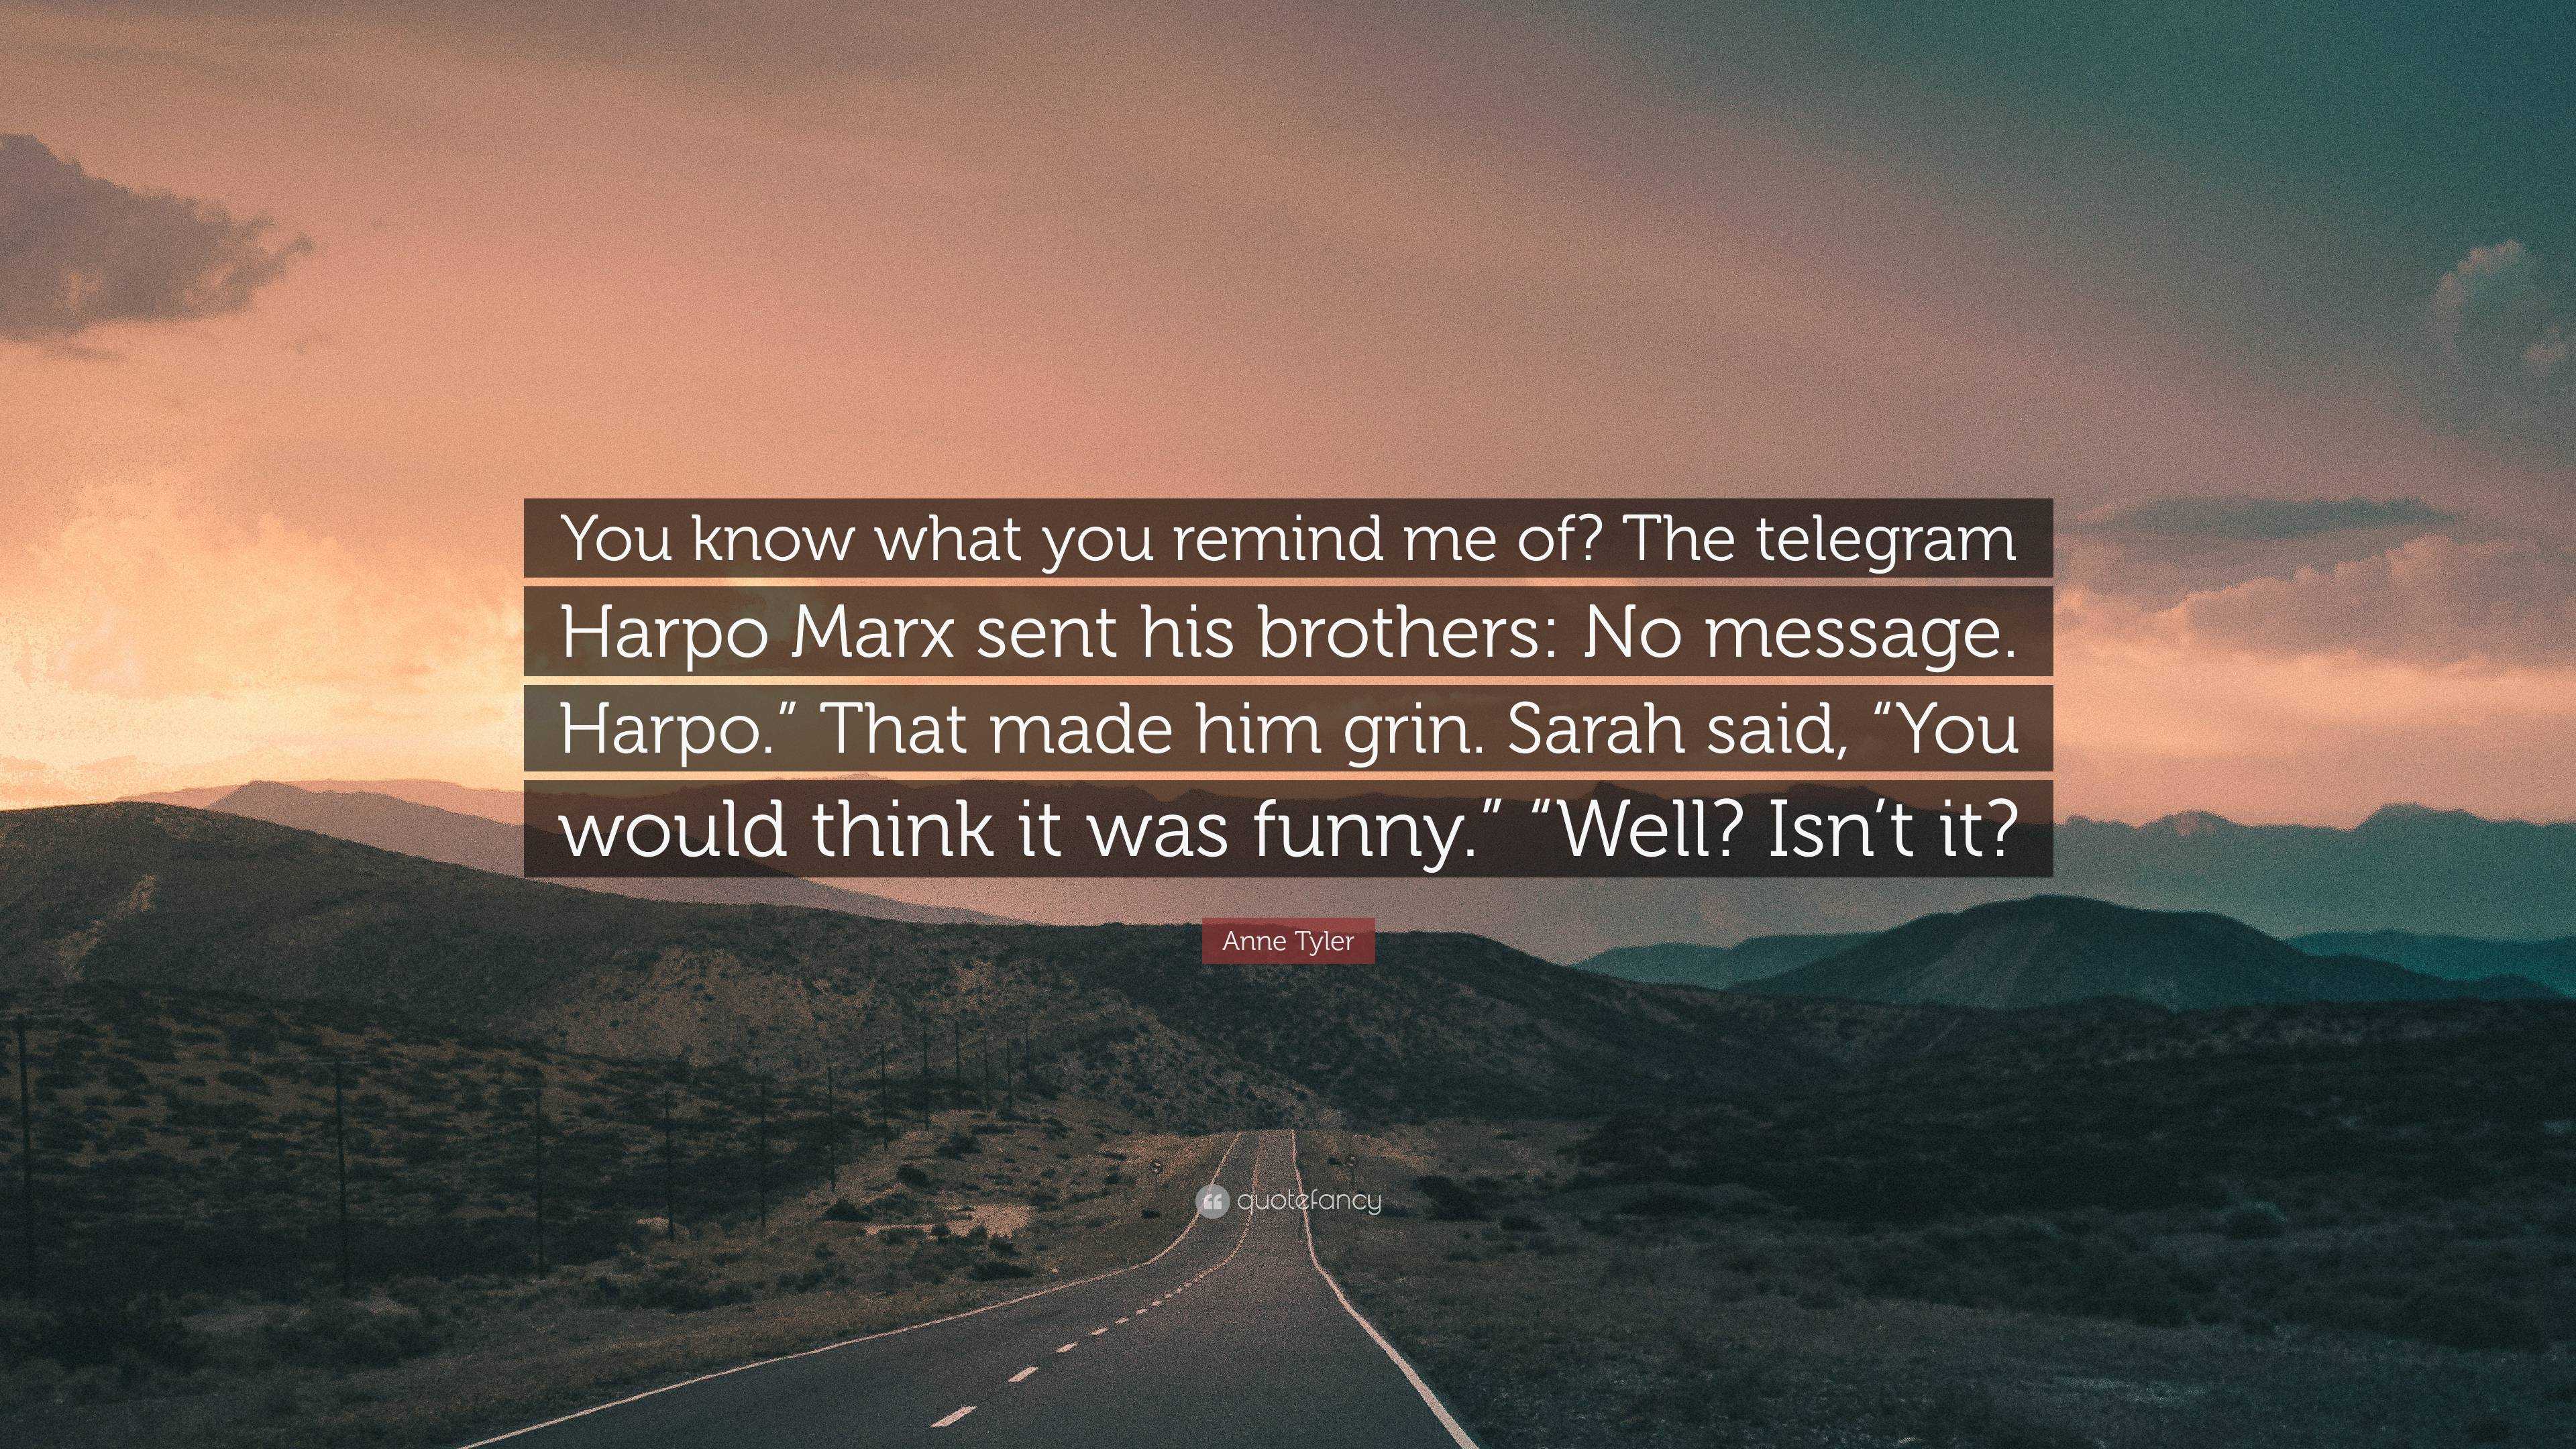 Anne Tyler Quote: “You know what you remind me of? The telegram Harpo Marx  sent his brothers: No message. Harpo.” That made him grin. Sarah...”